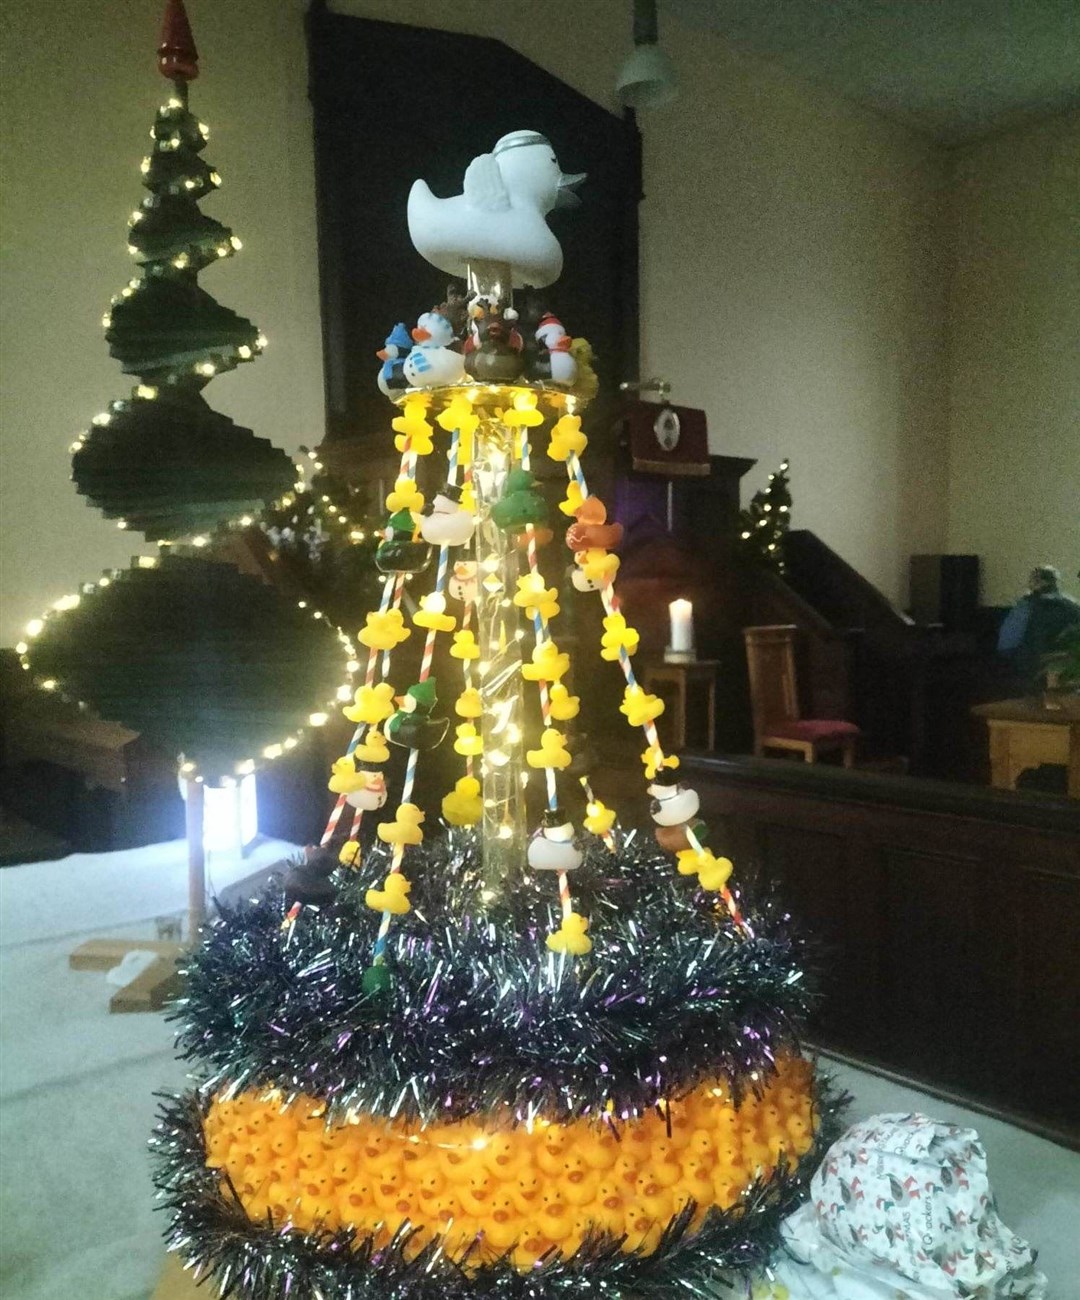 A Tree with a Twist, and Quacking Christmas Tree.